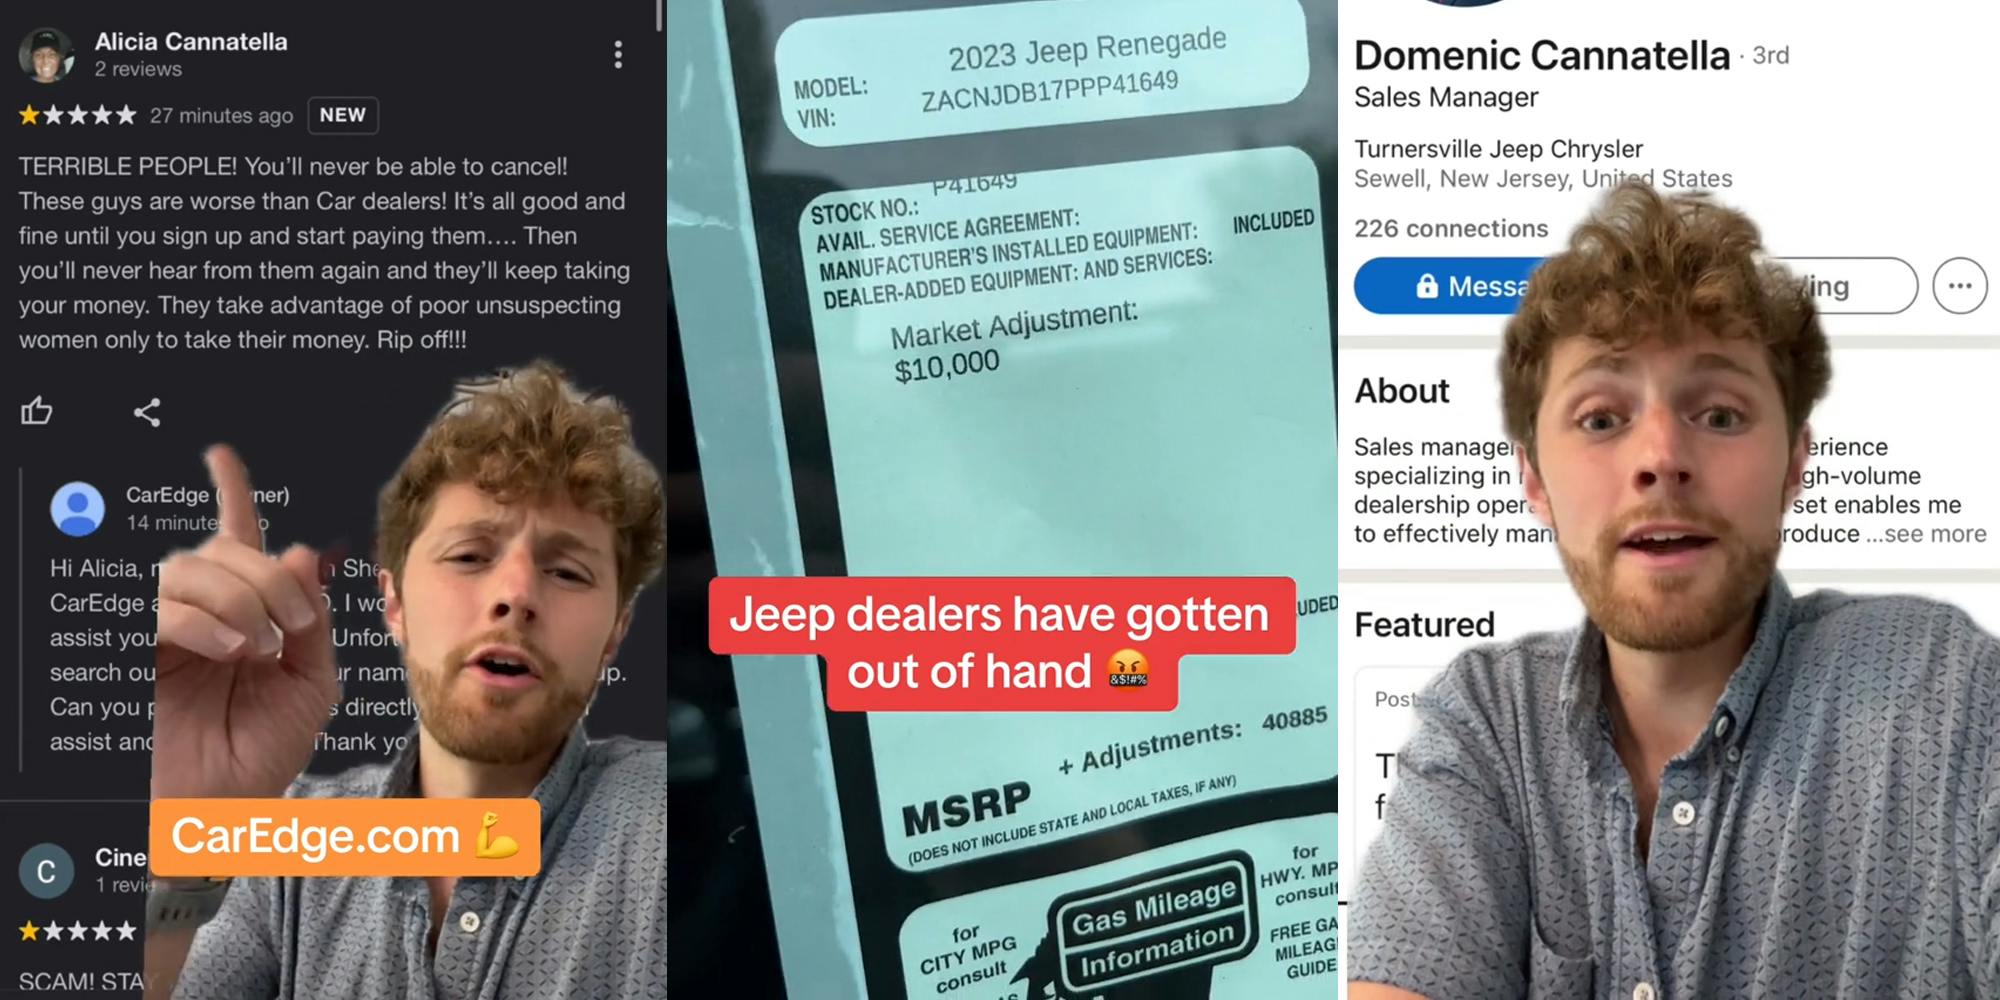 man greenscreen TikTok over image of 1 star review with caption "CarEdge.com" (l) jeep with sticker in window showing market adjustment with caption "Jeep dealers have gotten way out of hand" (l) man greenscreen TikTok over sale's manager Facebook with same last name as woman from review (r)